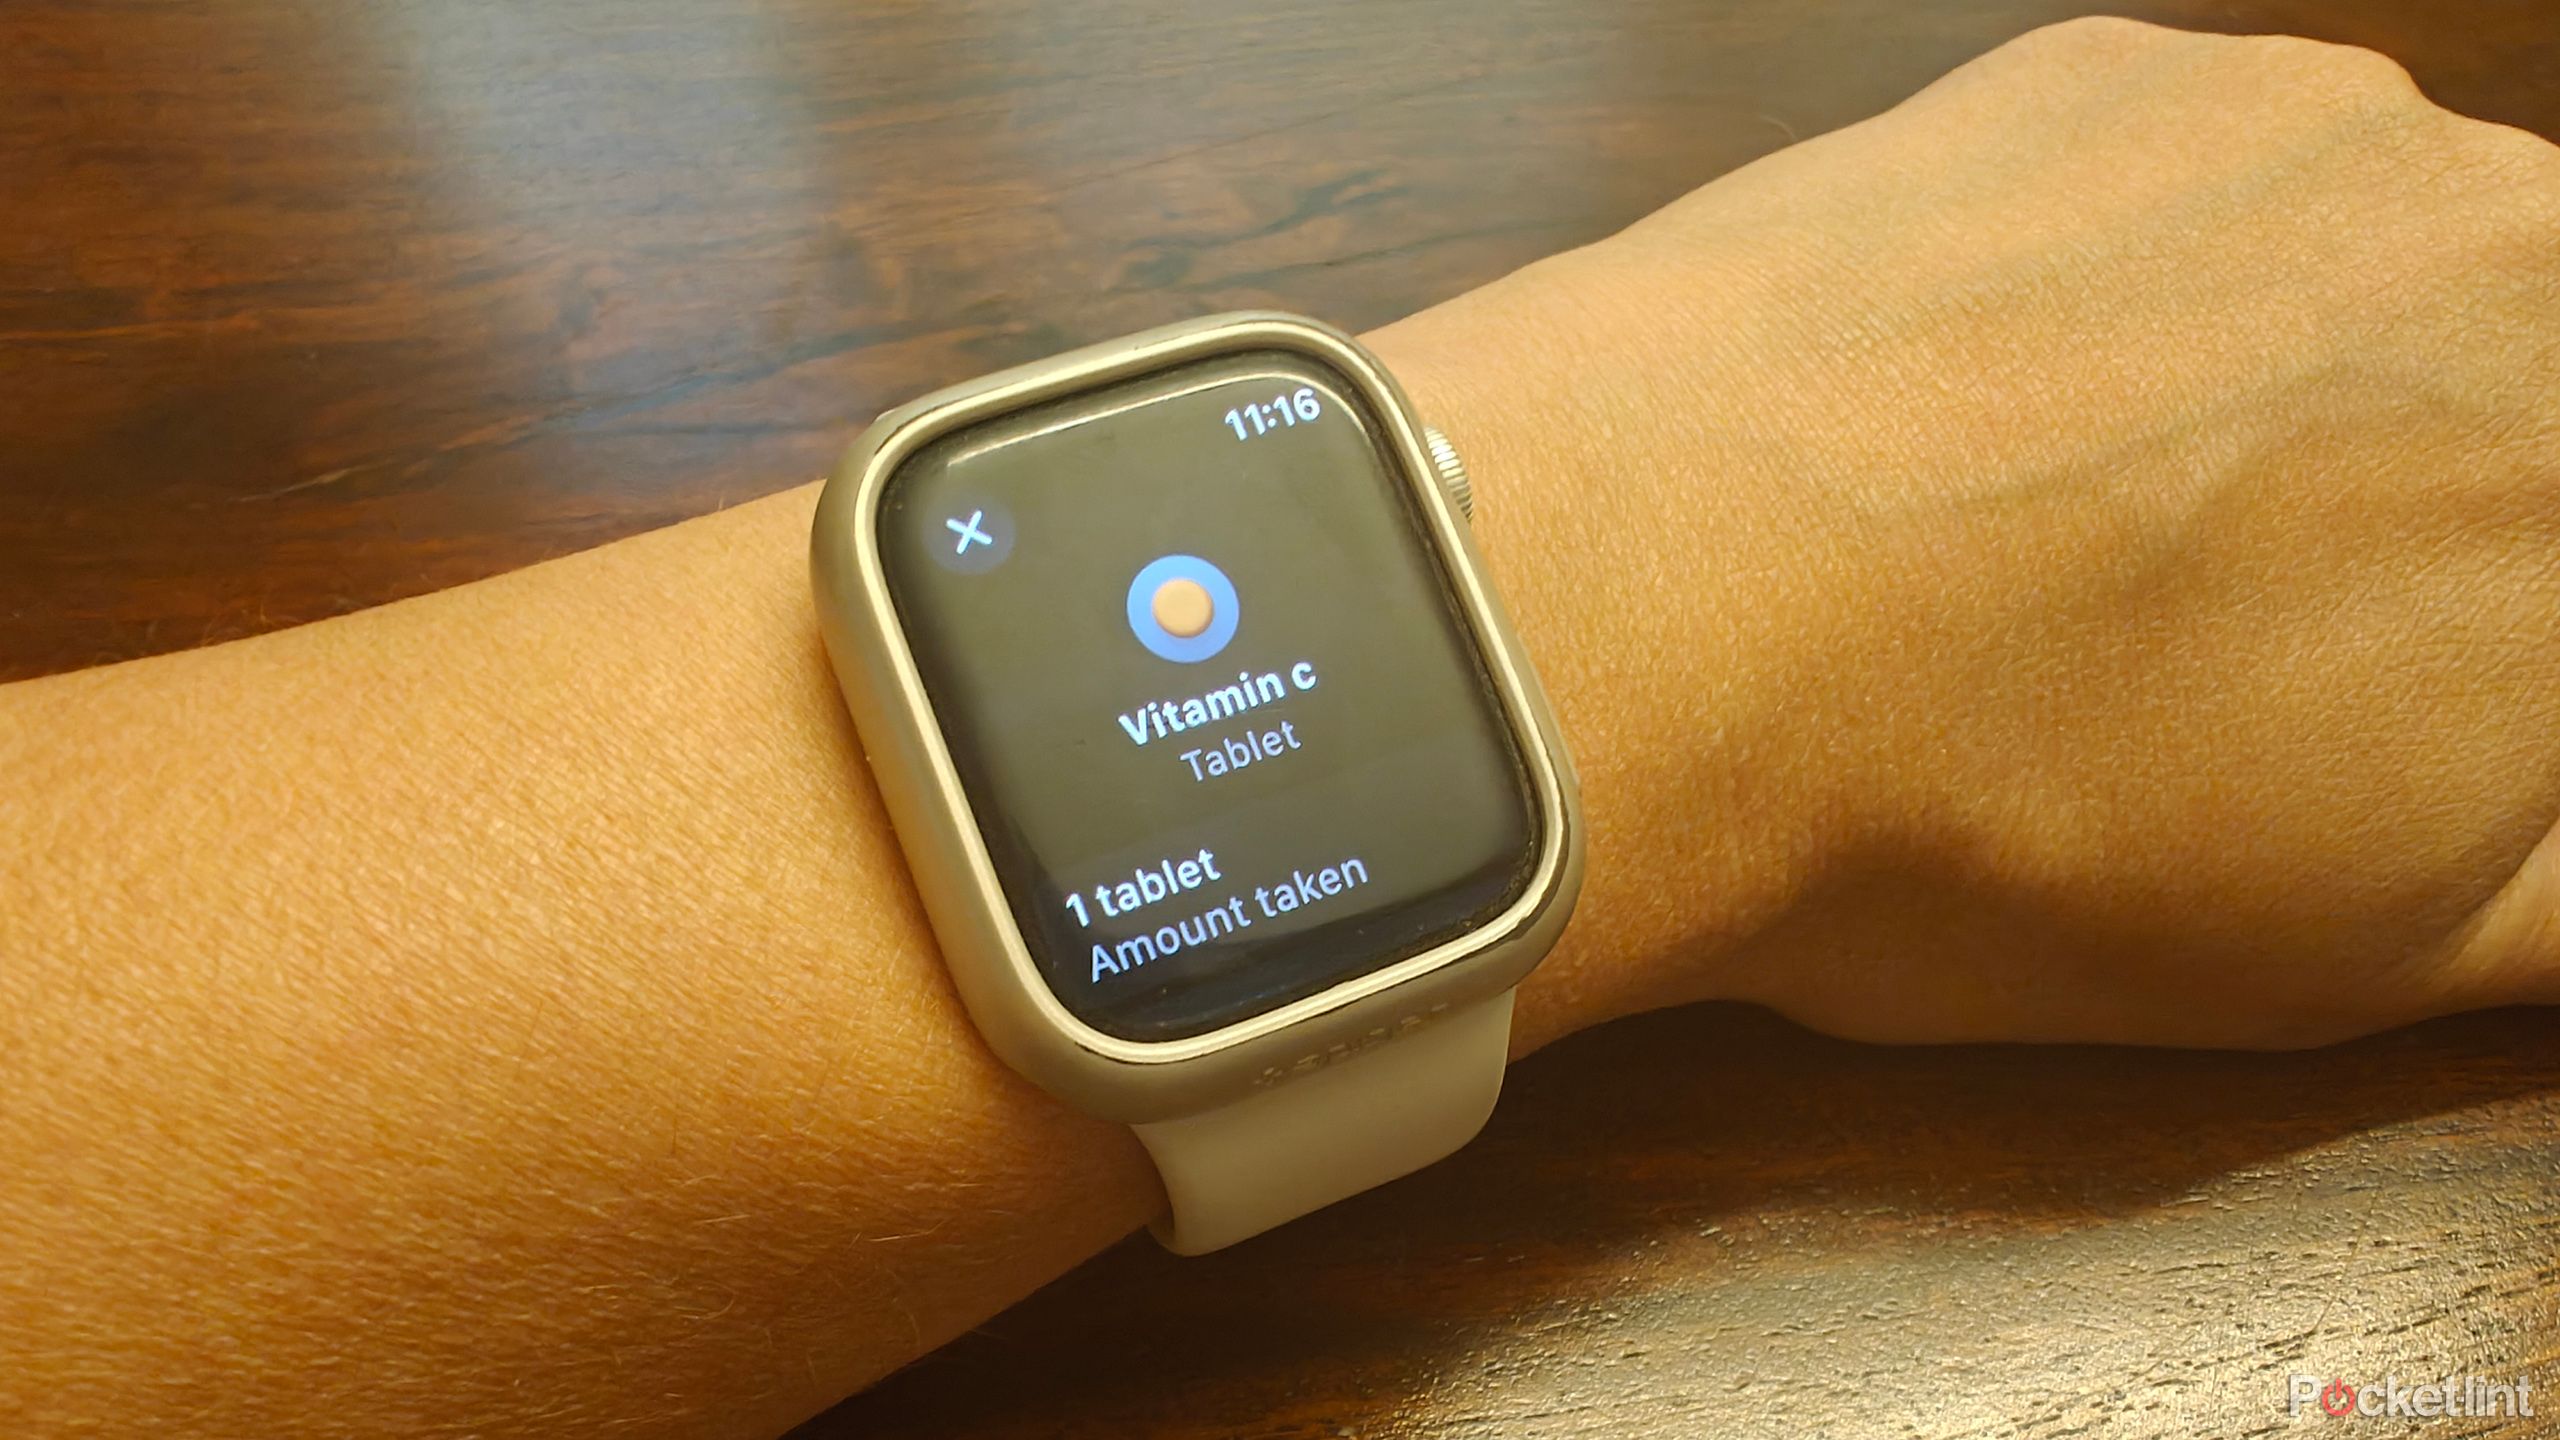 Apple Watch will now display medication reminders to take Vitamin C